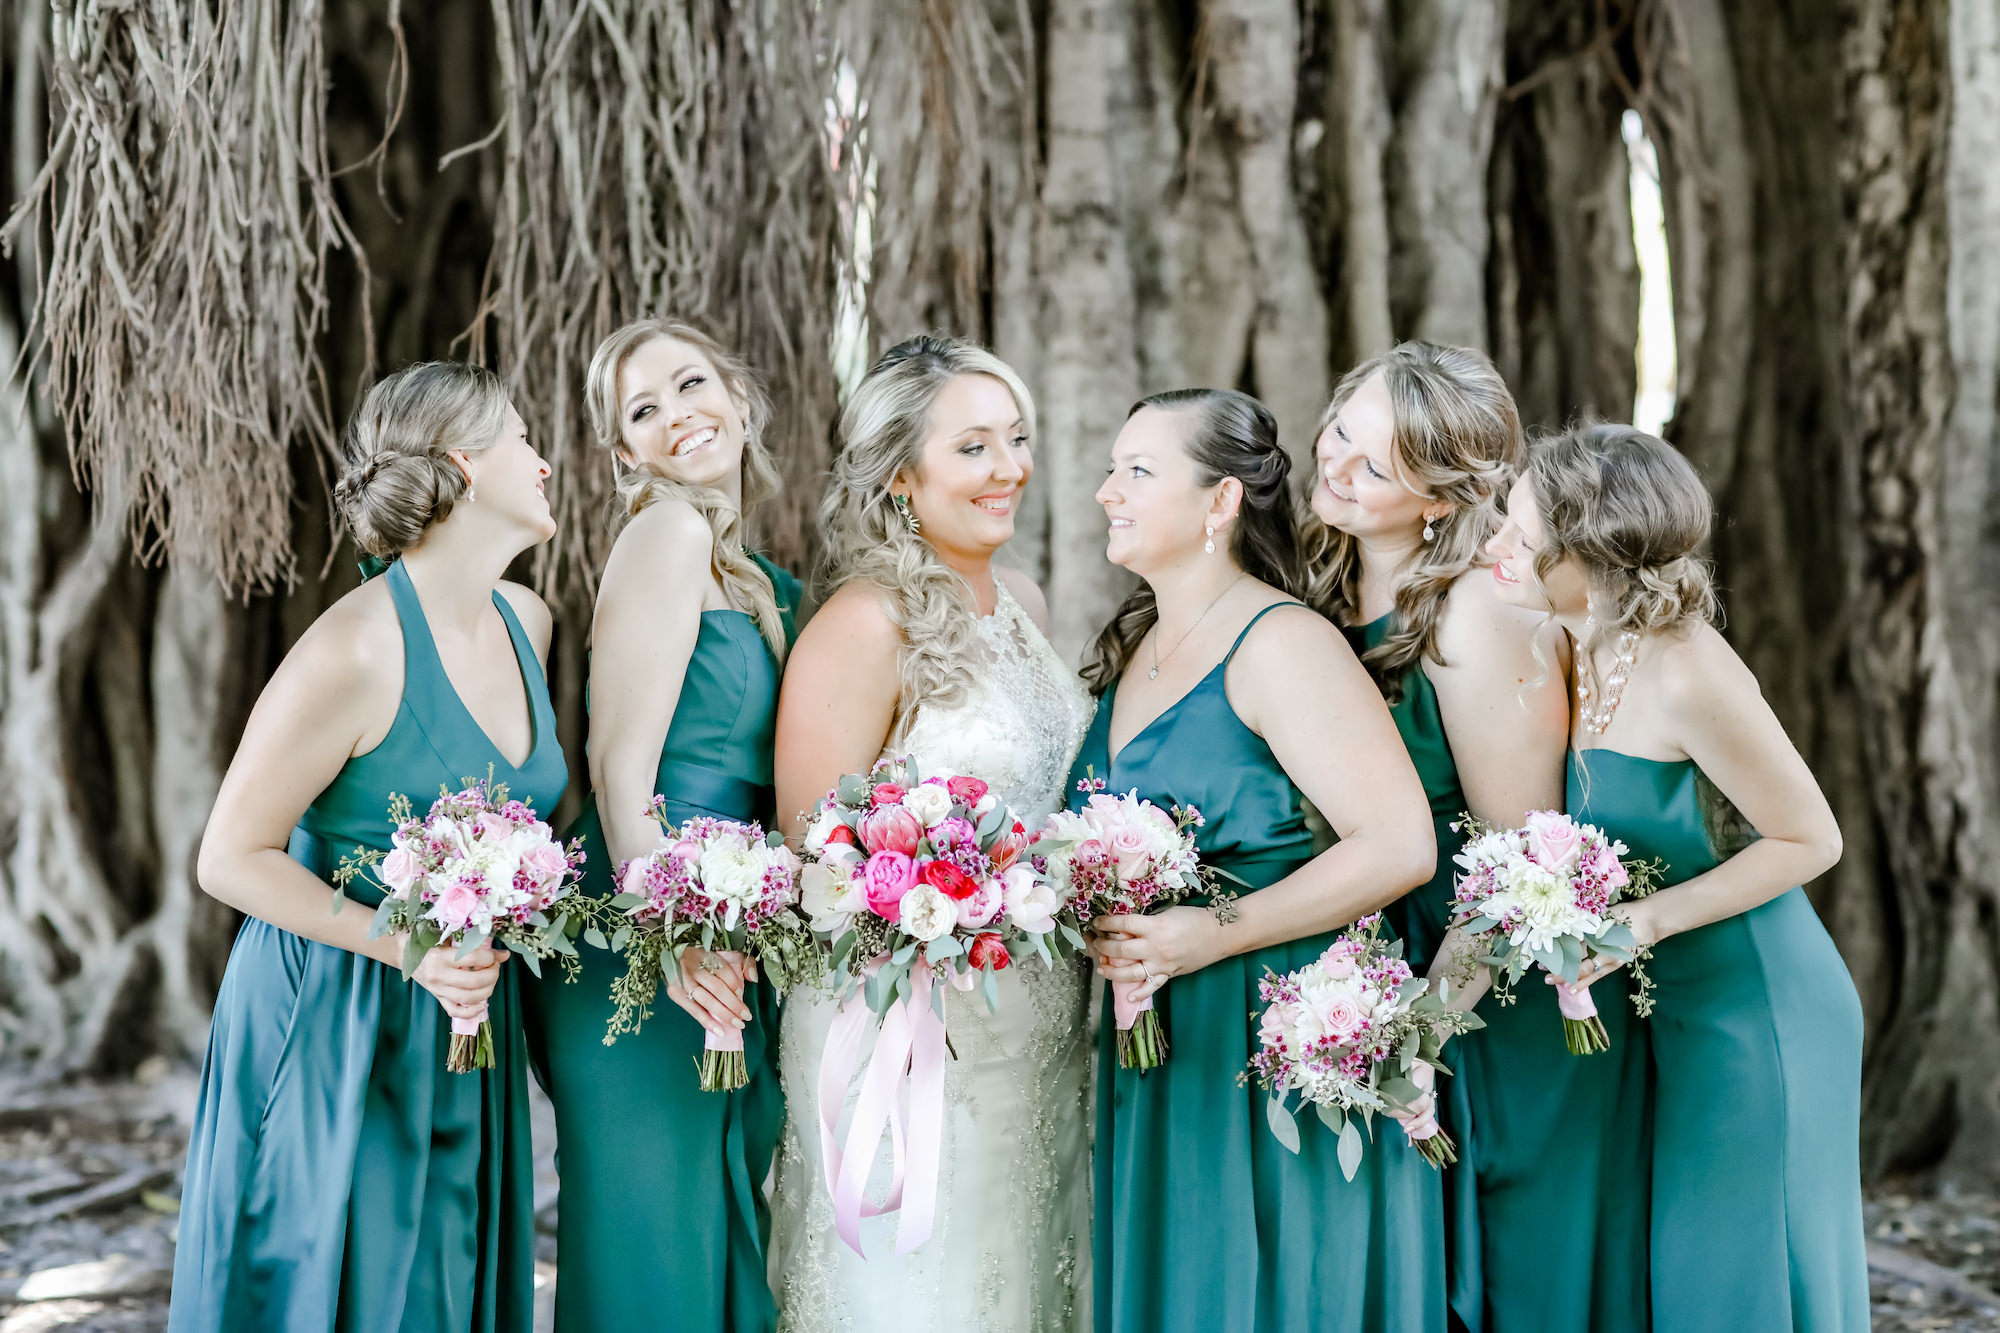 Tampa Bay Bride and Bridesmaids, Wearing Long Emerald Green David's Bridal Dresses, Holding Elegant Floral Bouquets with Bright Red, Dusty Rose, Blush Pink and Ivory Bouquets with Greenery, In front of Banyan Trees | Florida Wedding Photographer Lifelong Photography Studios